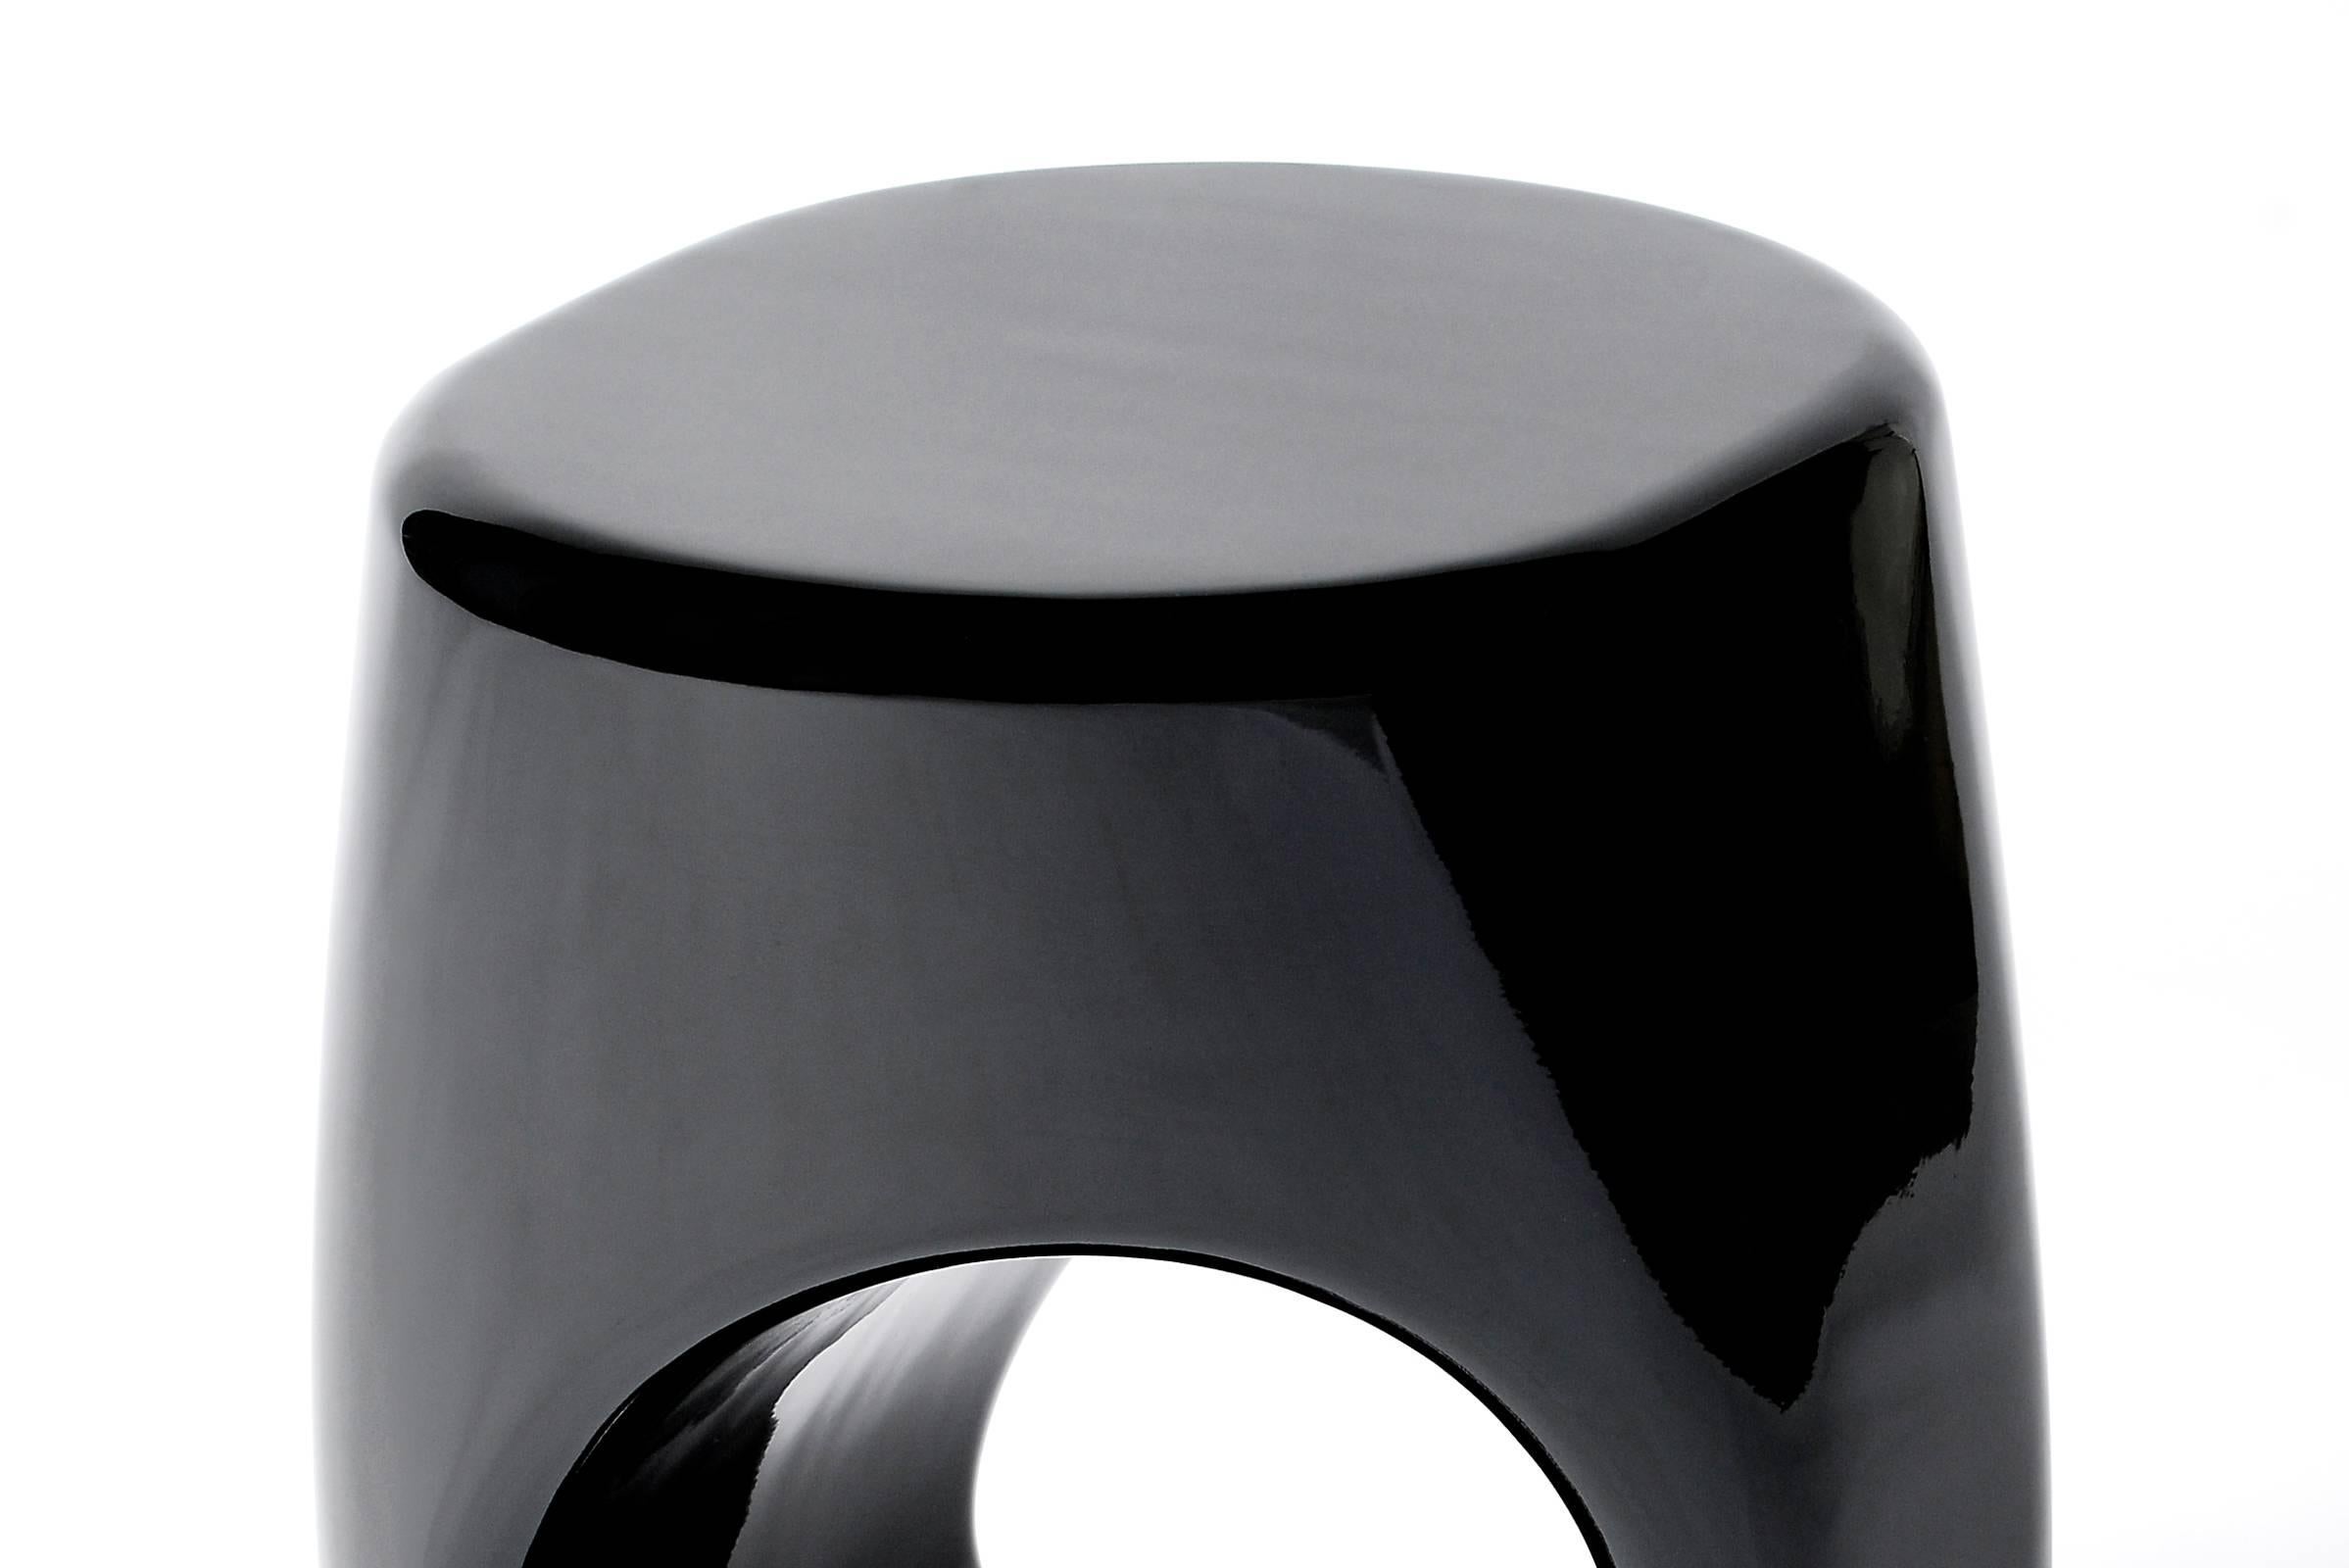 Stool black lacquered made in fiberglass,
lacquered in black with high gloss finishing.
Available in gold lacquered finish, on request.